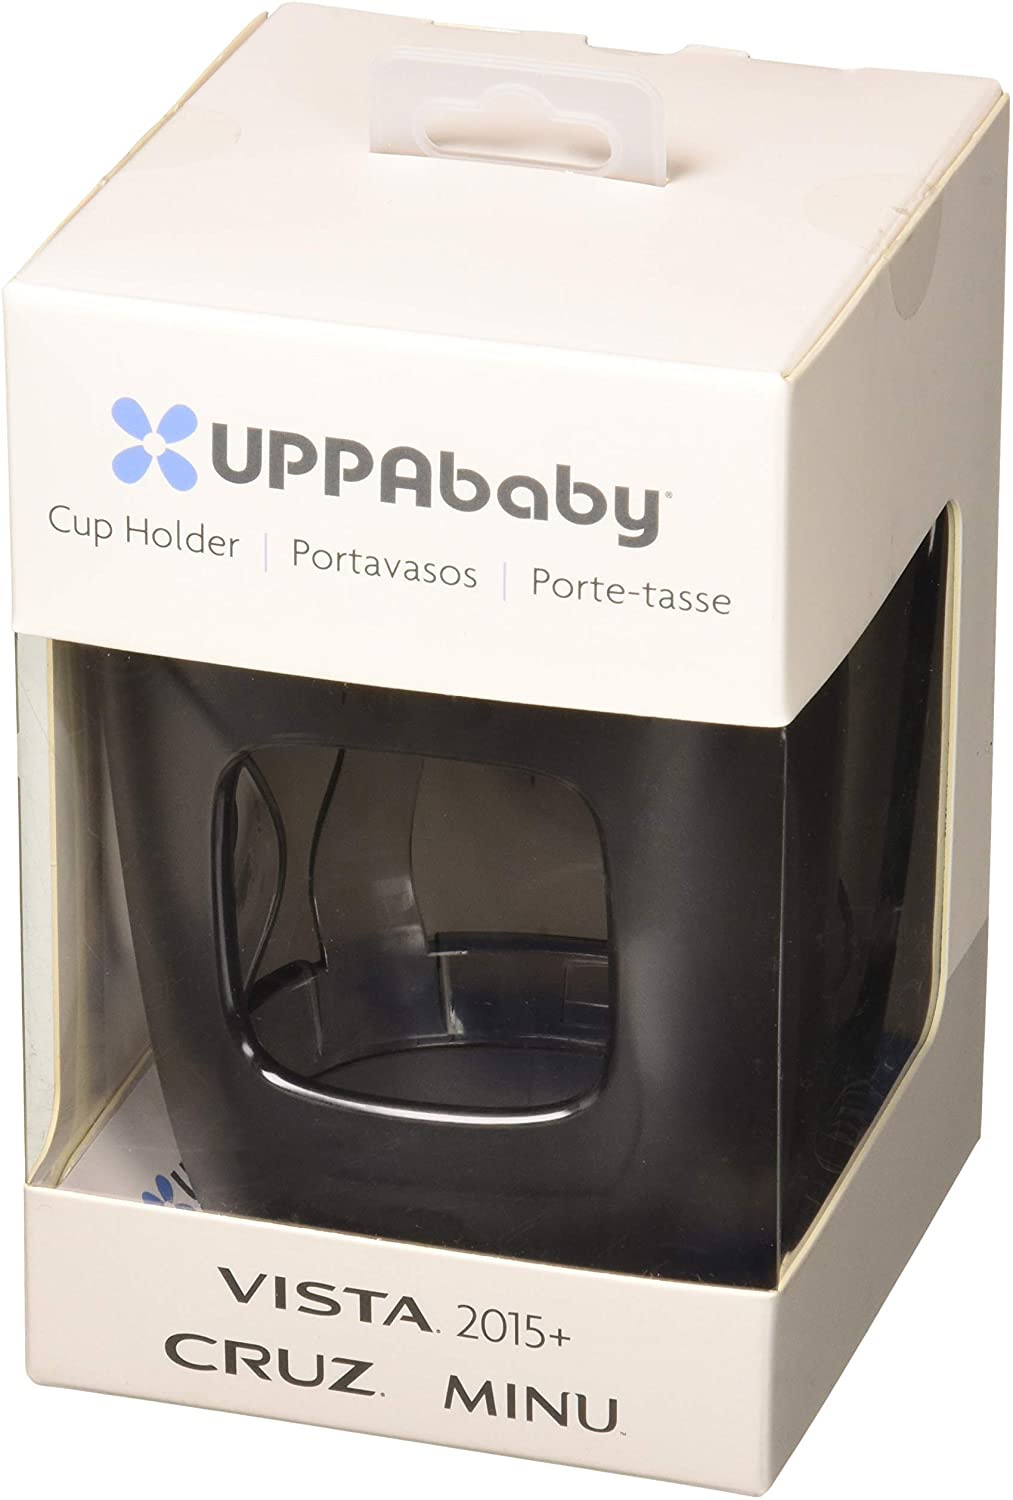 UPPAbaby Cup Holders